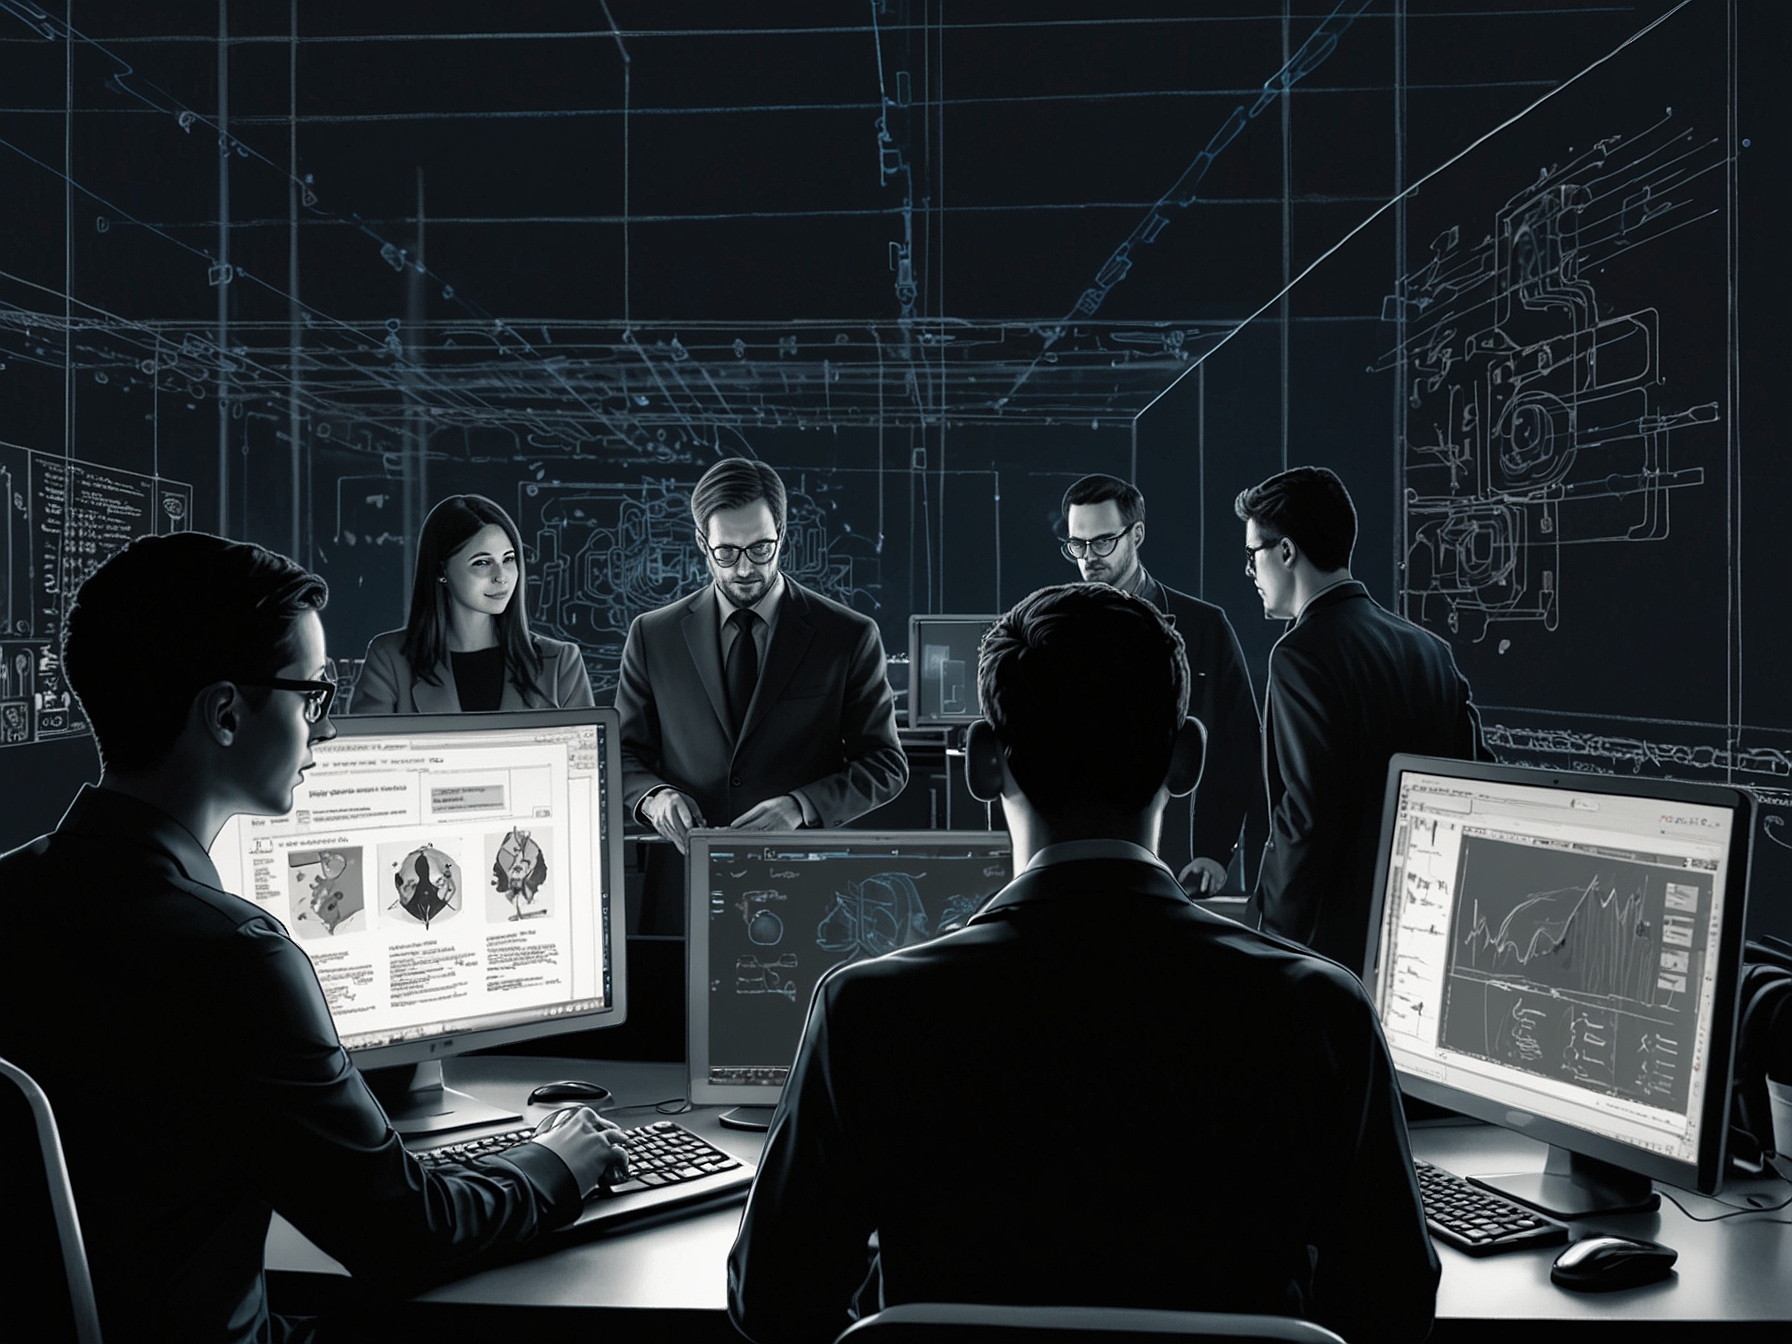 An image showing a diverse team of employees engaging in cyber security training, emphasizing the role of education in preventing social engineering and phishing attacks.